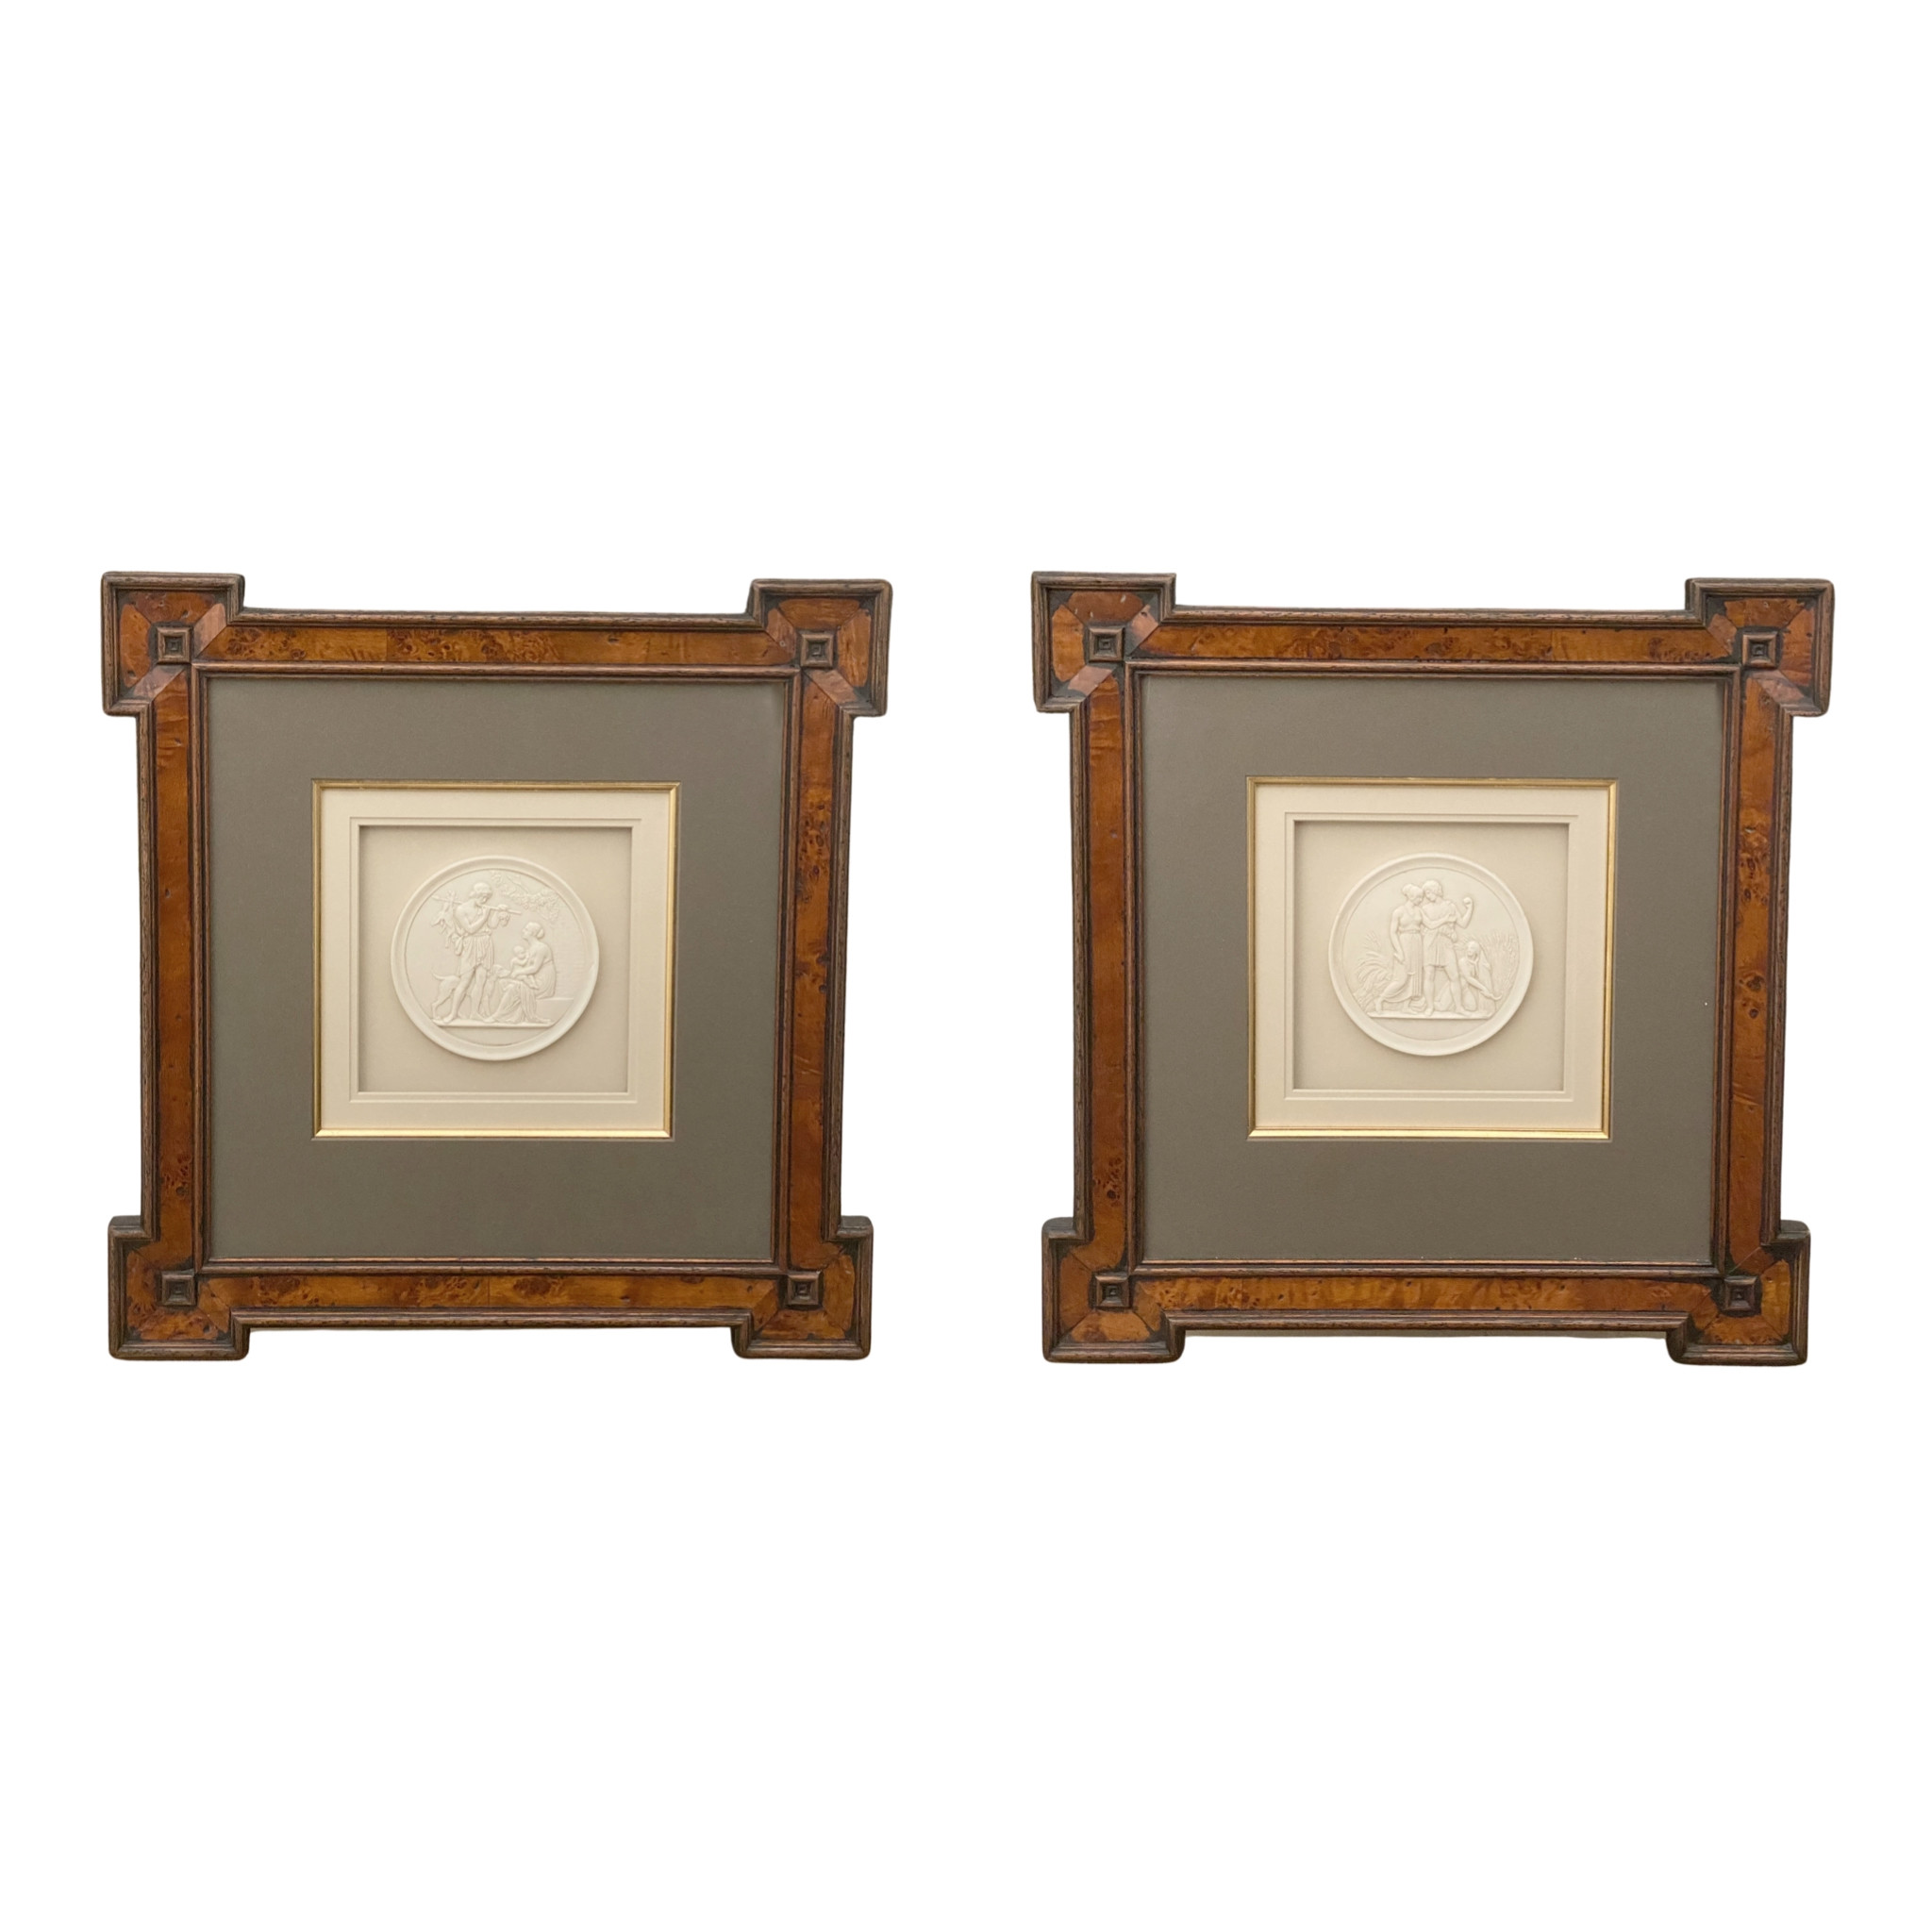 19TH C. FRAMED BISQUE PLAQUES "SUMMER AND AUTUMN"